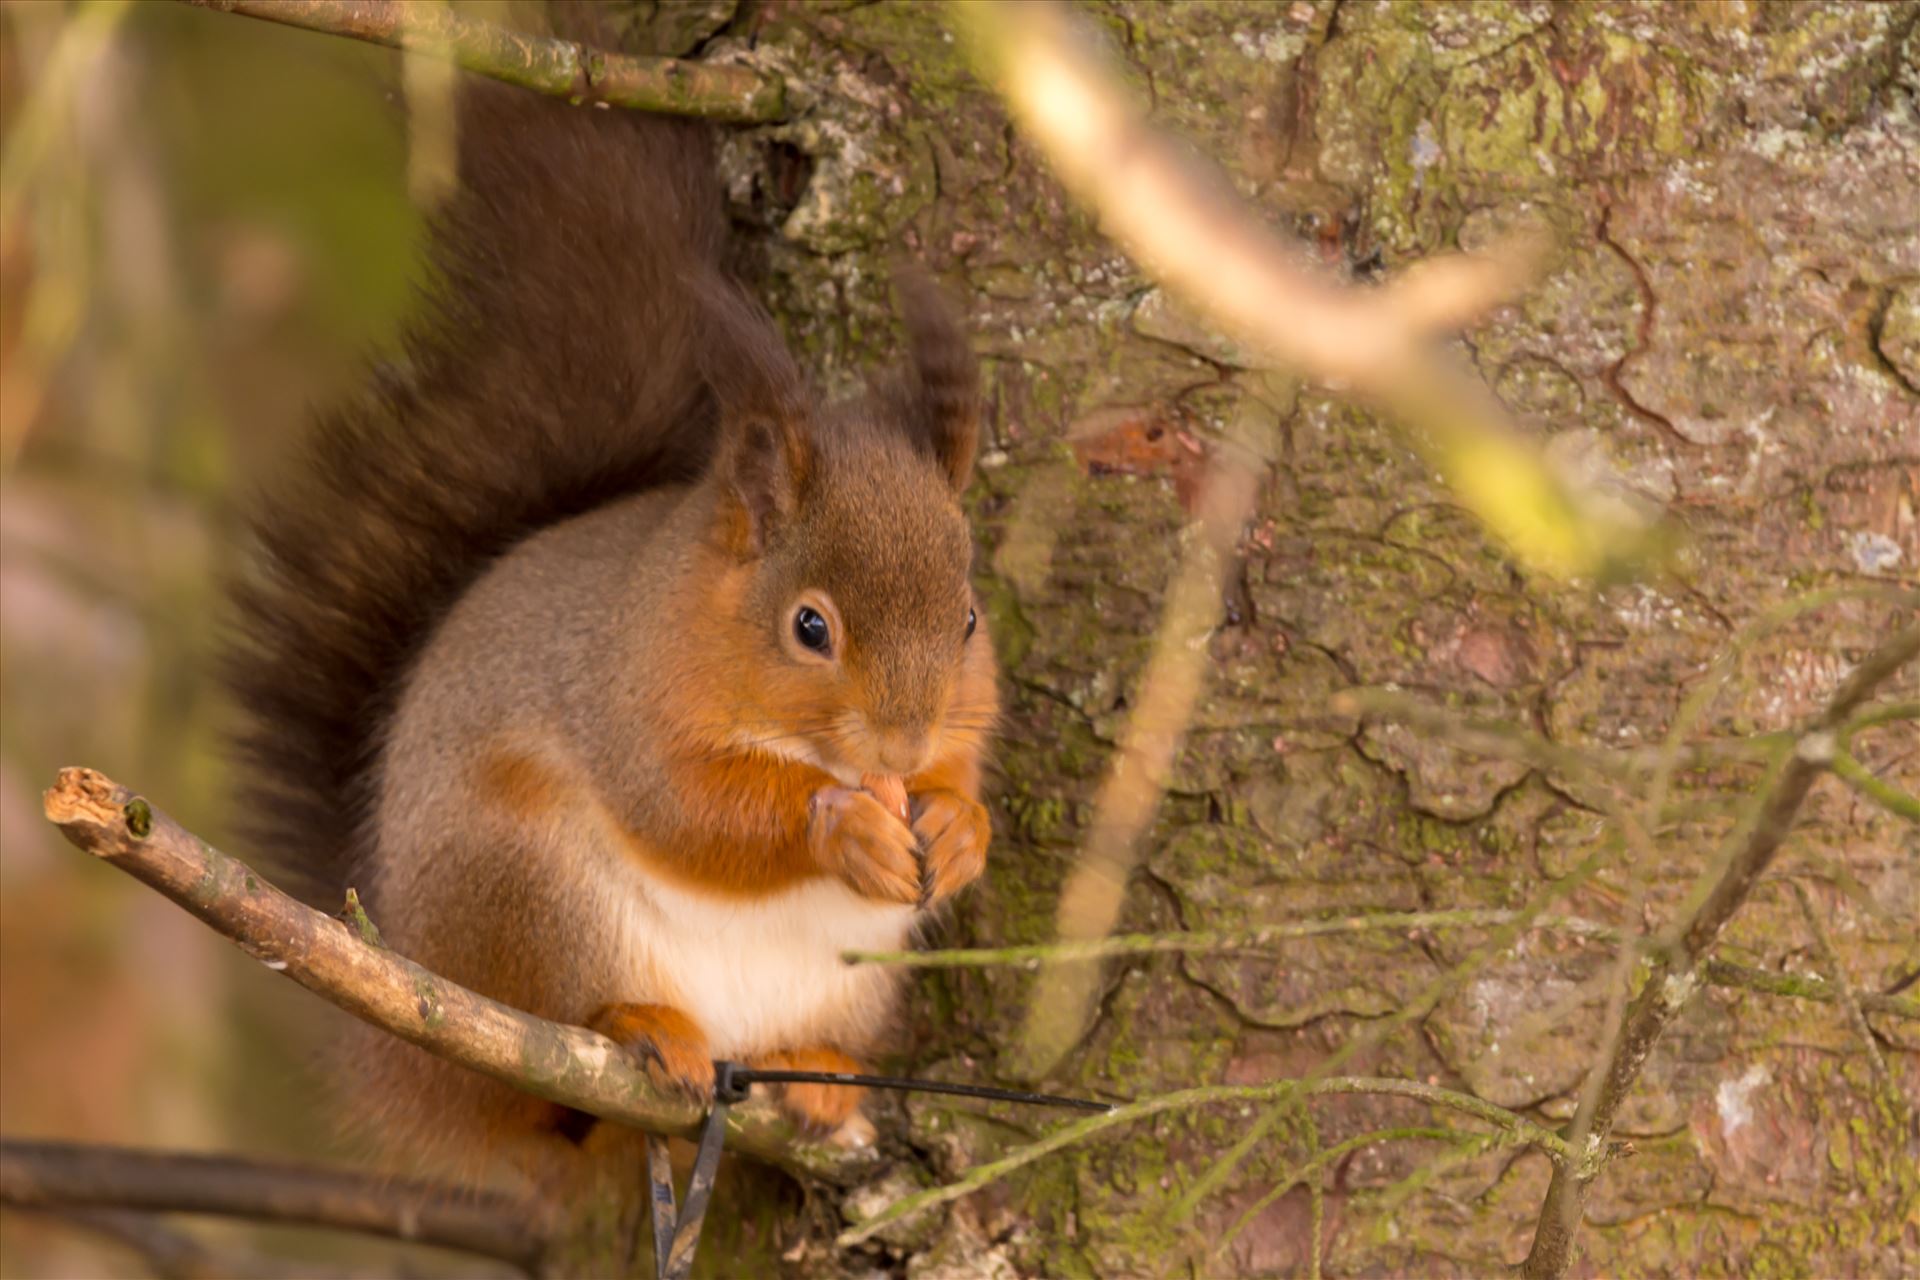 Red squirrel in the wild The red squirrel is native to Britain, but its future is increasingly uncertain as the introduced American grey squirrel expands its range across the mainland. There are estimated to be only 140,000 red squirrels left in Britain, with over 2.5M greys. by philreay